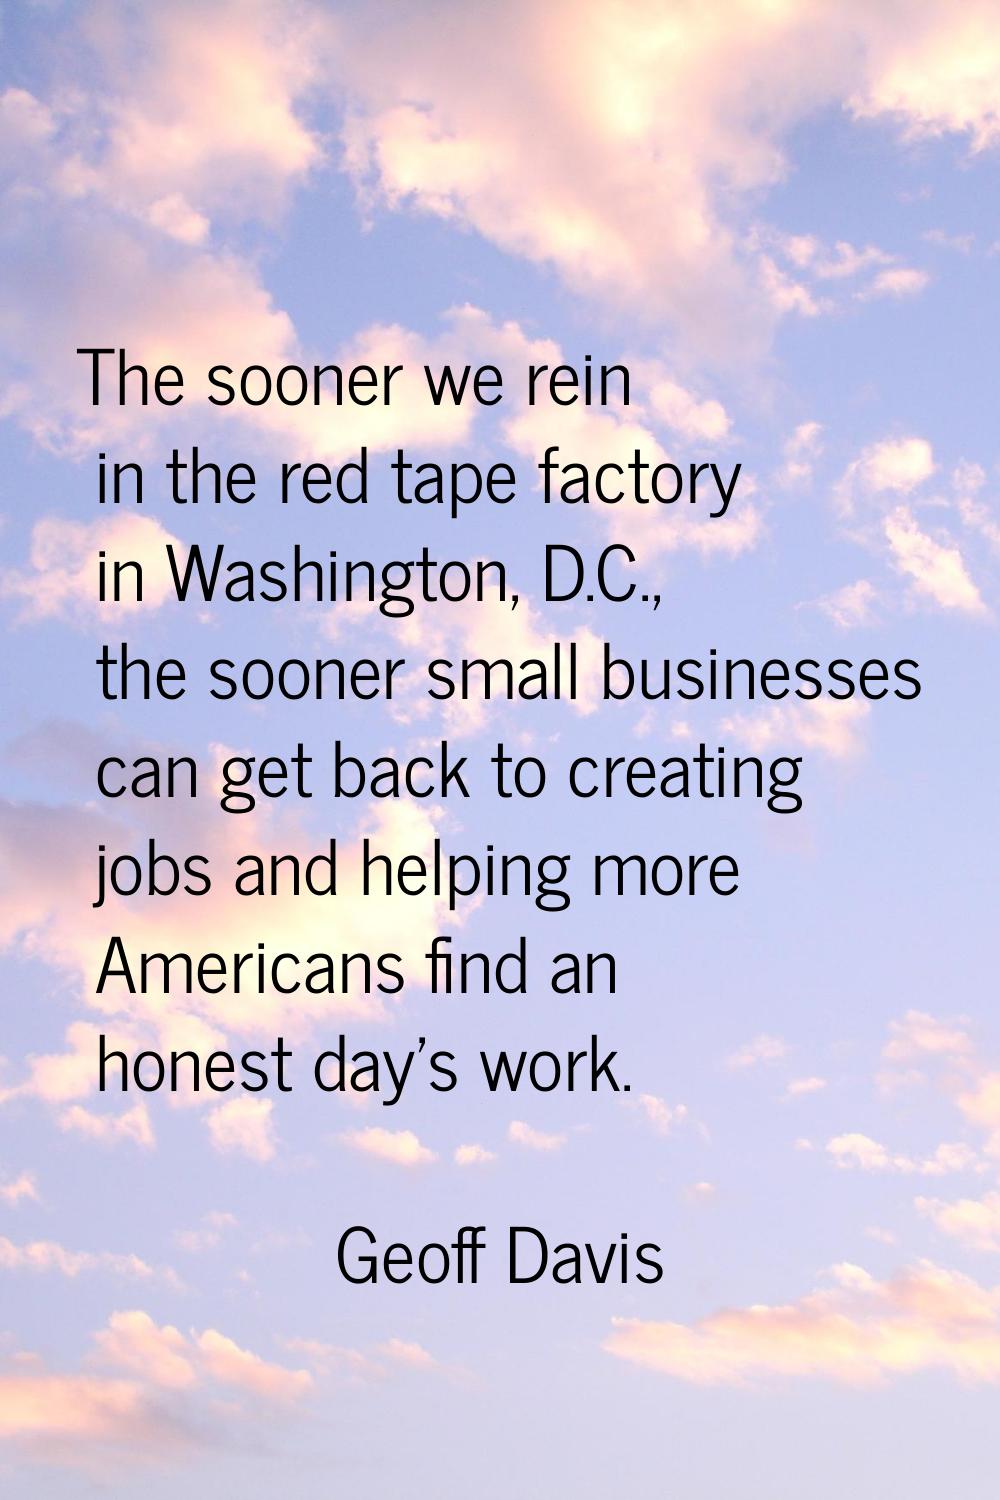 The sooner we rein in the red tape factory in Washington, D.C., the sooner small businesses can get